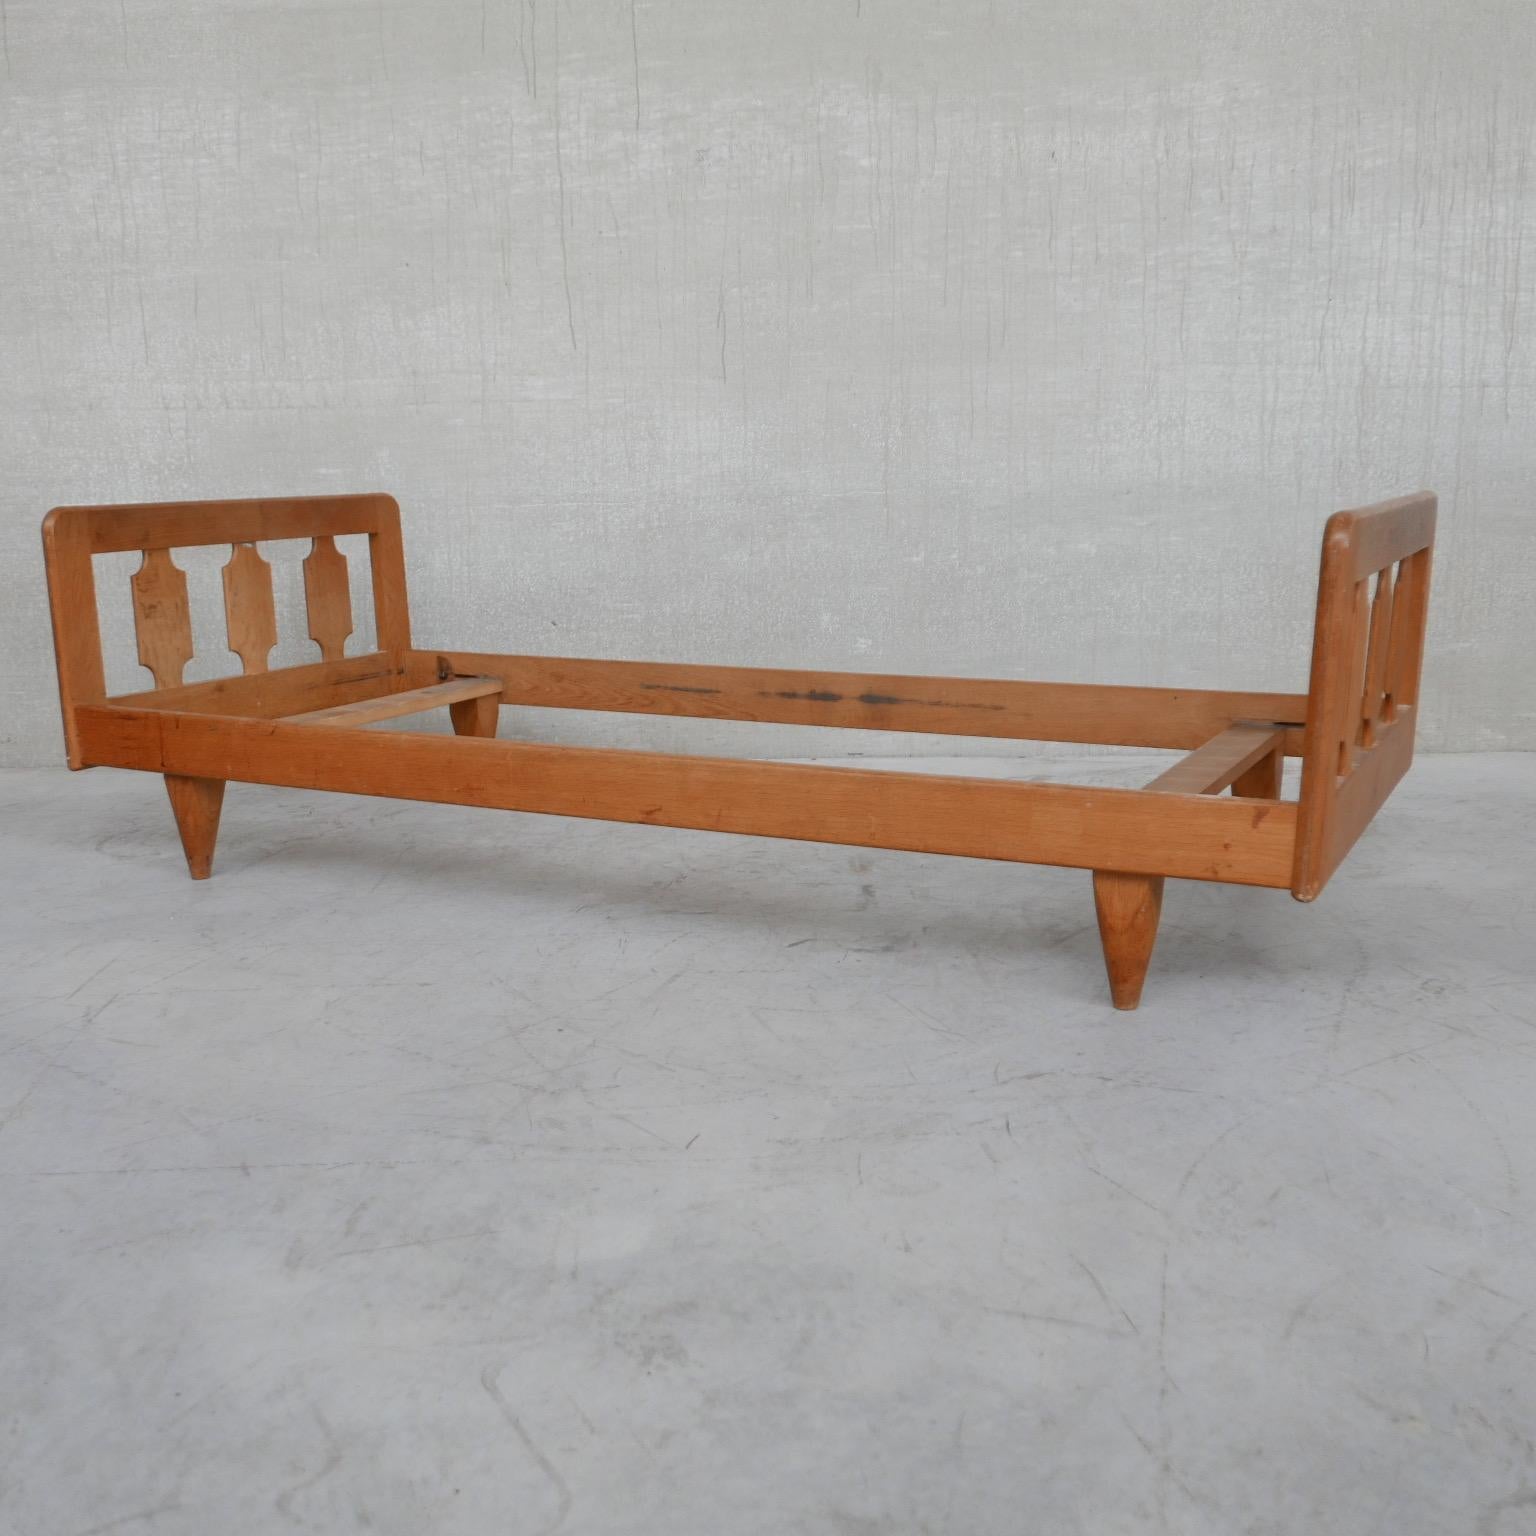 A day bed by Guillerme et Chambron.

France, circa 1960s.

Oak, will be provided with slats and a mattress which can be upholstered.

Ideal as a day bed or a single bed.

Good condition, wear commensurate with age, it can be restorered by